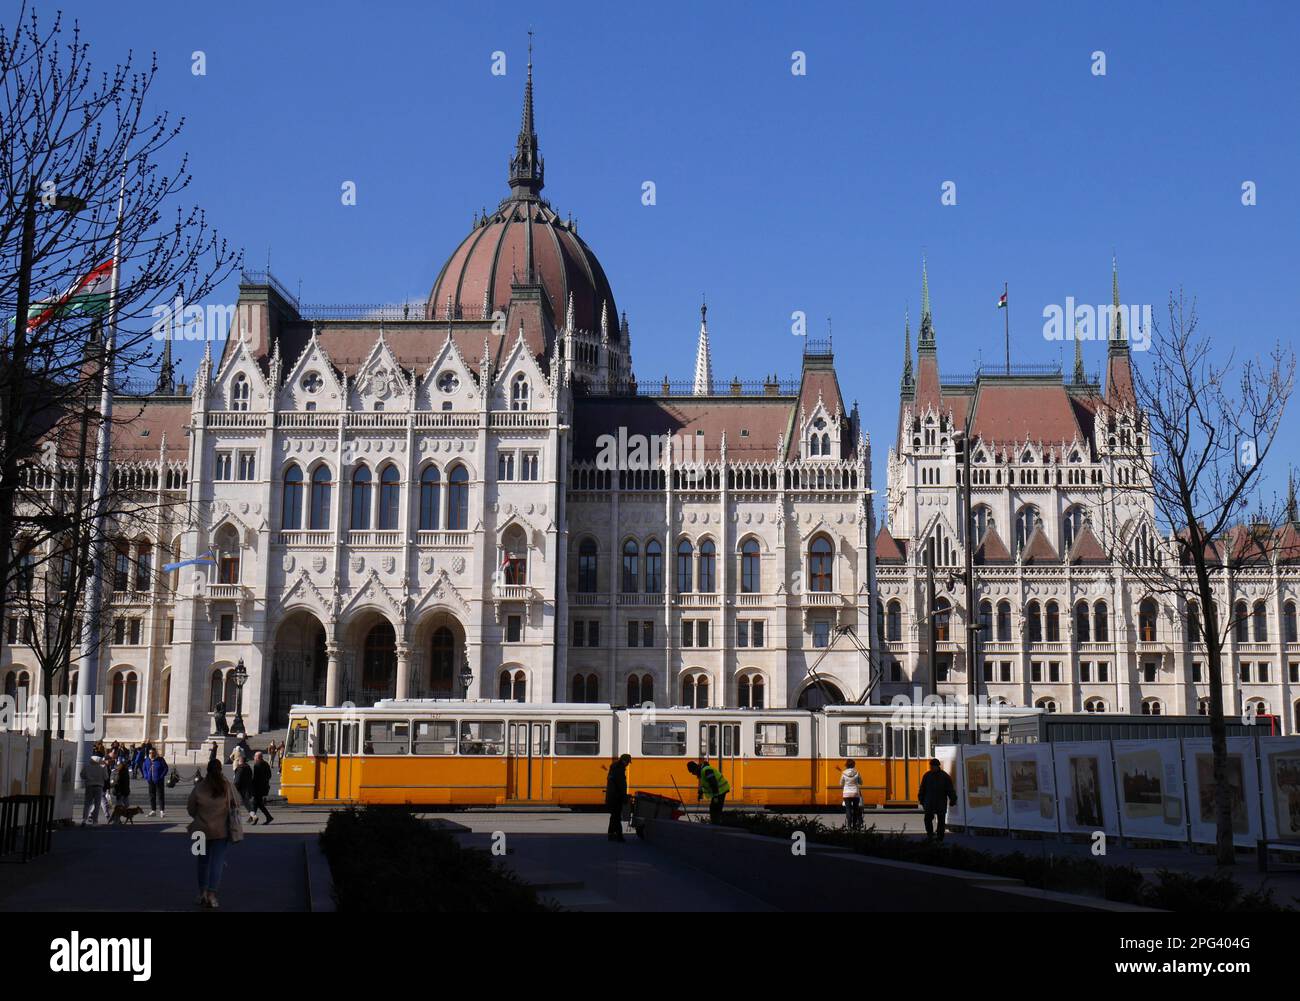 A tram runs past the neo-gothic Parliament building in Kossuth ter, Kossuth Square, designed by Imre Steindl in 1885, Budapest, Hungary Stock Photo